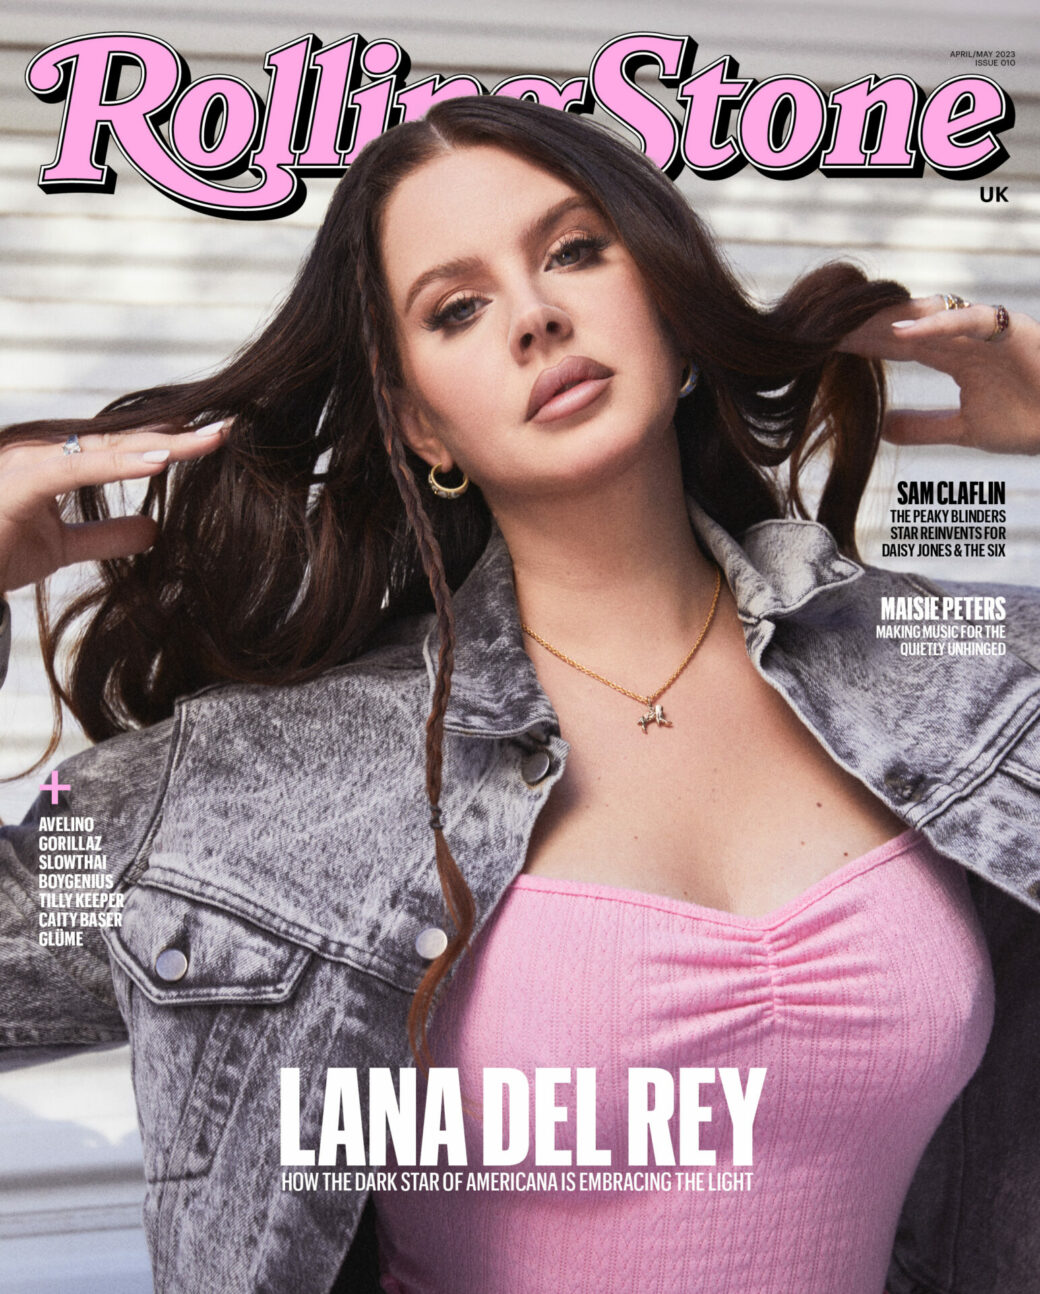 Lana Del Rey she does it for the girls